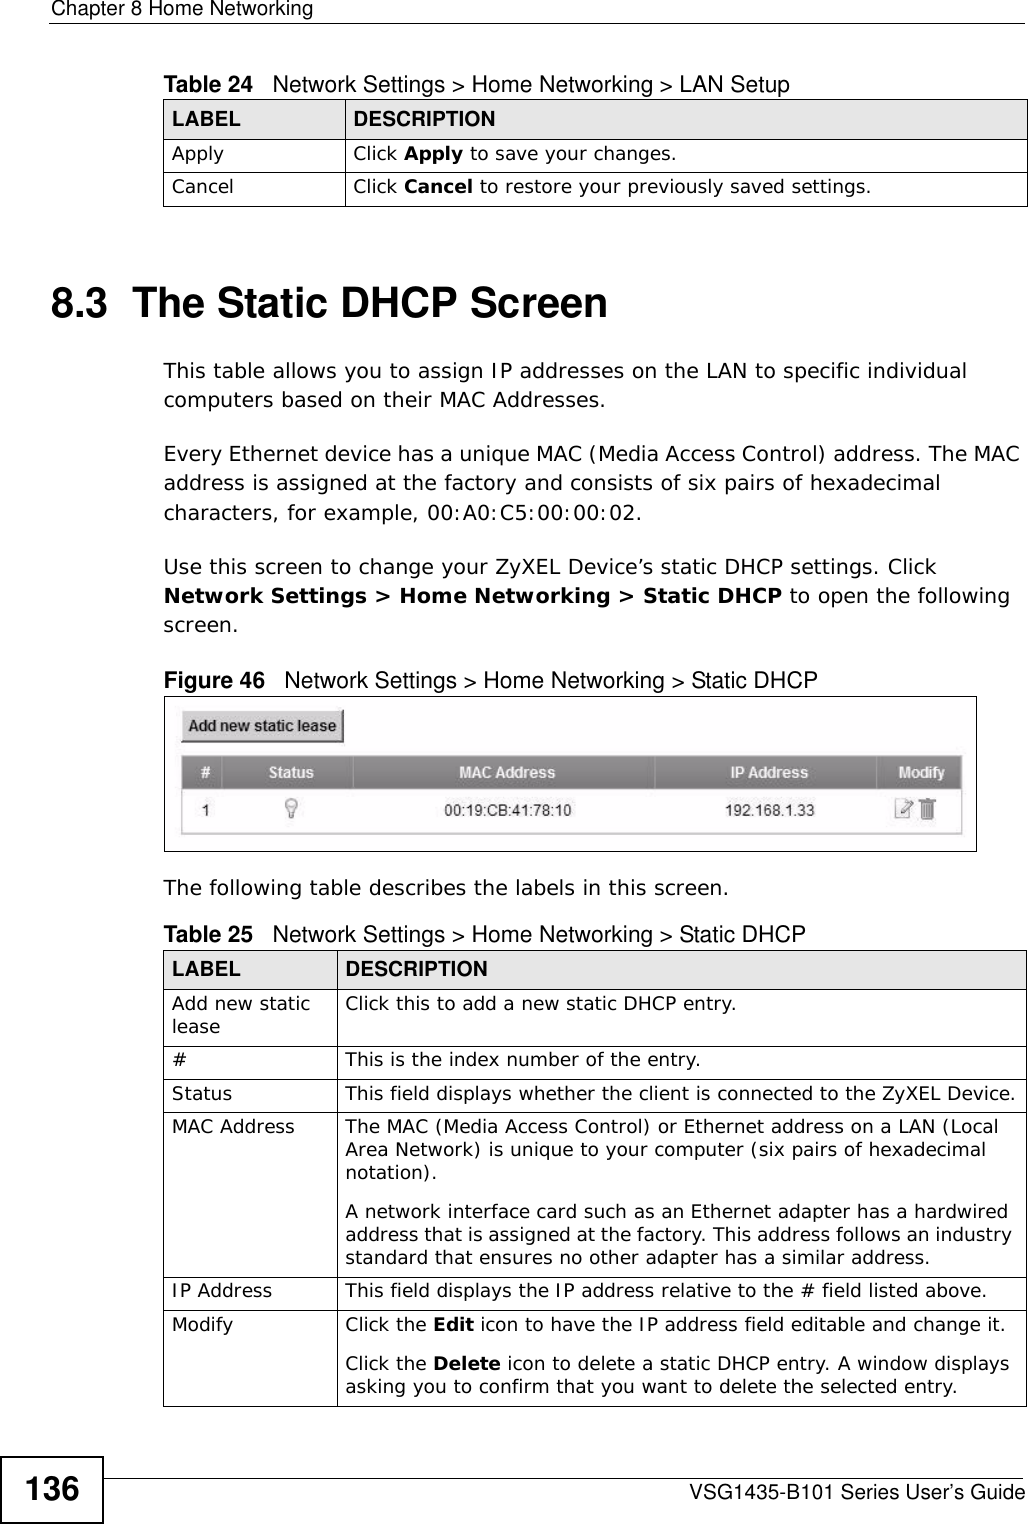 Chapter 8 Home NetworkingVSG1435-B101 Series User’s Guide1368.3  The Static DHCP ScreenThis table allows you to assign IP addresses on the LAN to specific individual computers based on their MAC Addresses. Every Ethernet device has a unique MAC (Media Access Control) address. The MAC address is assigned at the factory and consists of six pairs of hexadecimal characters, for example, 00:A0:C5:00:00:02.Use this screen to change your ZyXEL Device’s static DHCP settings. Click Network Settings &gt; Home Networking &gt; Static DHCP to open the following screen.Figure 46   Network Settings &gt; Home Networking &gt; Static DHCP The following table describes the labels in this screen.Apply Click Apply to save your changes.Cancel Click Cancel to restore your previously saved settings.Table 24   Network Settings &gt; Home Networking &gt; LAN SetupLABEL DESCRIPTIONTable 25   Network Settings &gt; Home Networking &gt; Static DHCPLABEL DESCRIPTIONAdd new static lease Click this to add a new static DHCP entry. # This is the index number of the entry.Status This field displays whether the client is connected to the ZyXEL Device.MAC Address The MAC (Media Access Control) or Ethernet address on a LAN (Local Area Network) is unique to your computer (six pairs of hexadecimal notation).A network interface card such as an Ethernet adapter has a hardwired address that is assigned at the factory. This address follows an industry standard that ensures no other adapter has a similar address.IP Address This field displays the IP address relative to the # field listed above.Modify Click the Edit icon to have the IP address field editable and change it.Click the Delete icon to delete a static DHCP entry. A window displays asking you to confirm that you want to delete the selected entry.